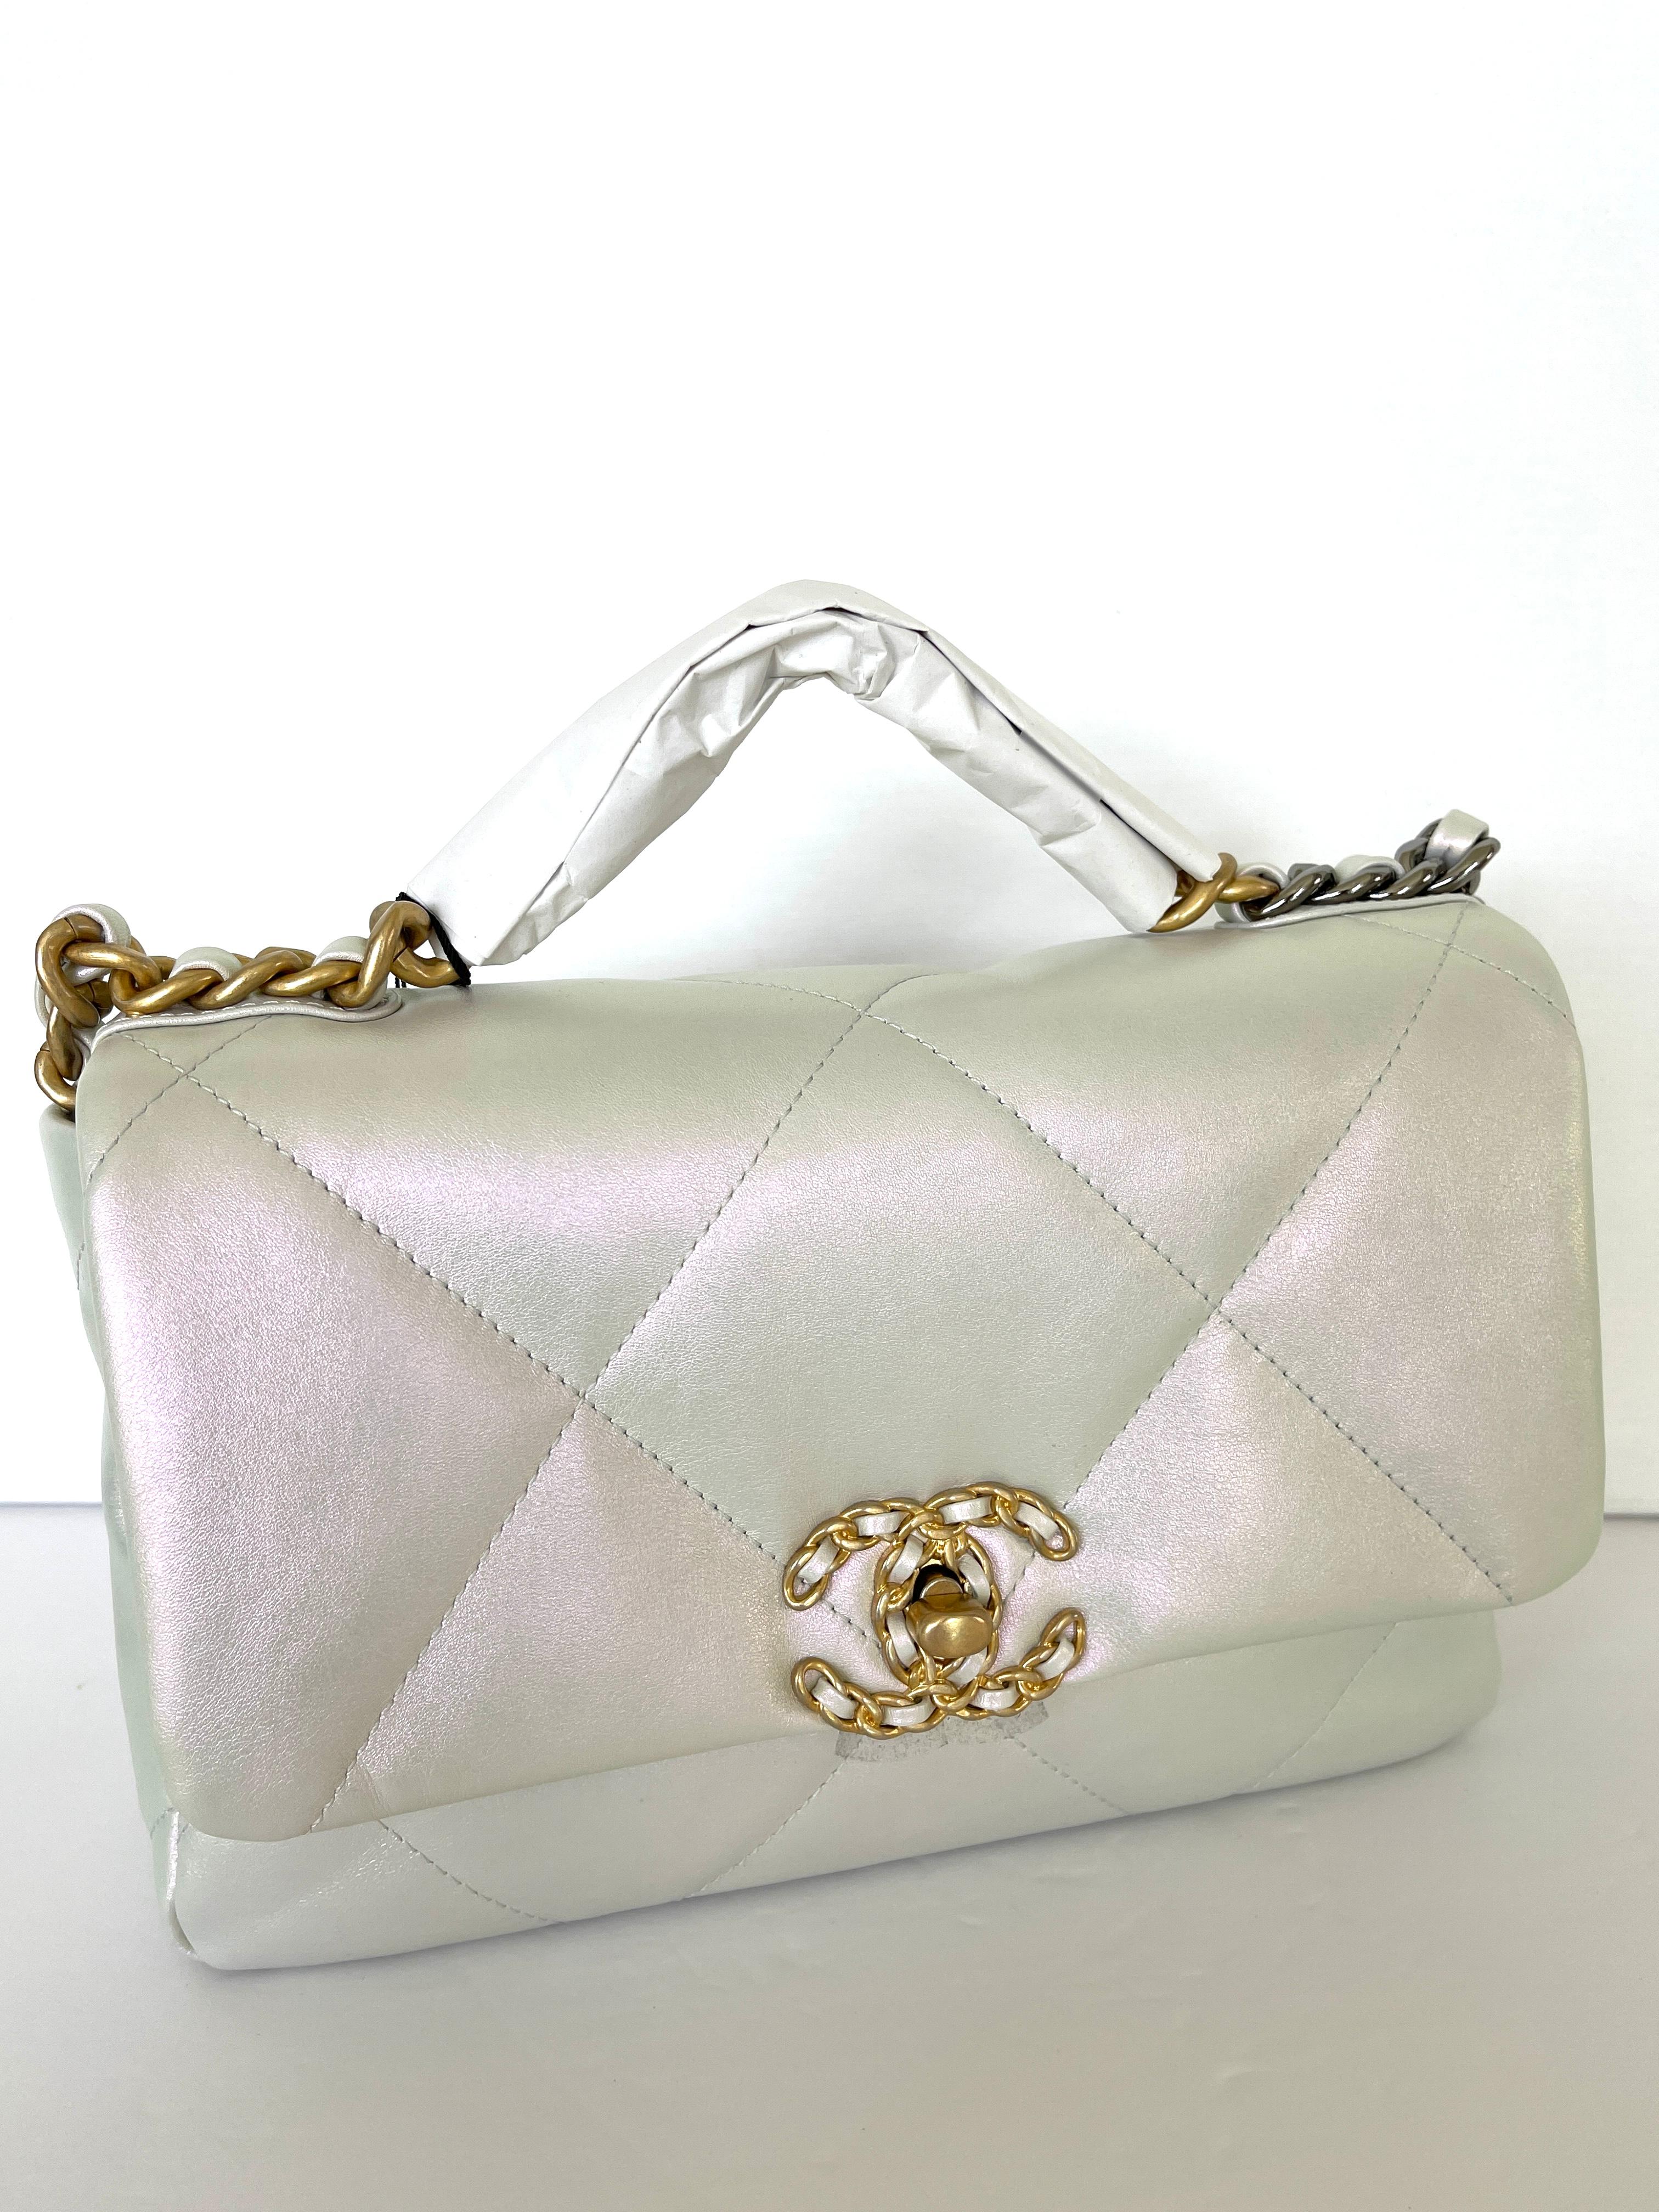 CHANEL Small 19 Flap Bag 21P Iridescent White Goatskin NEW Gold Silver 5